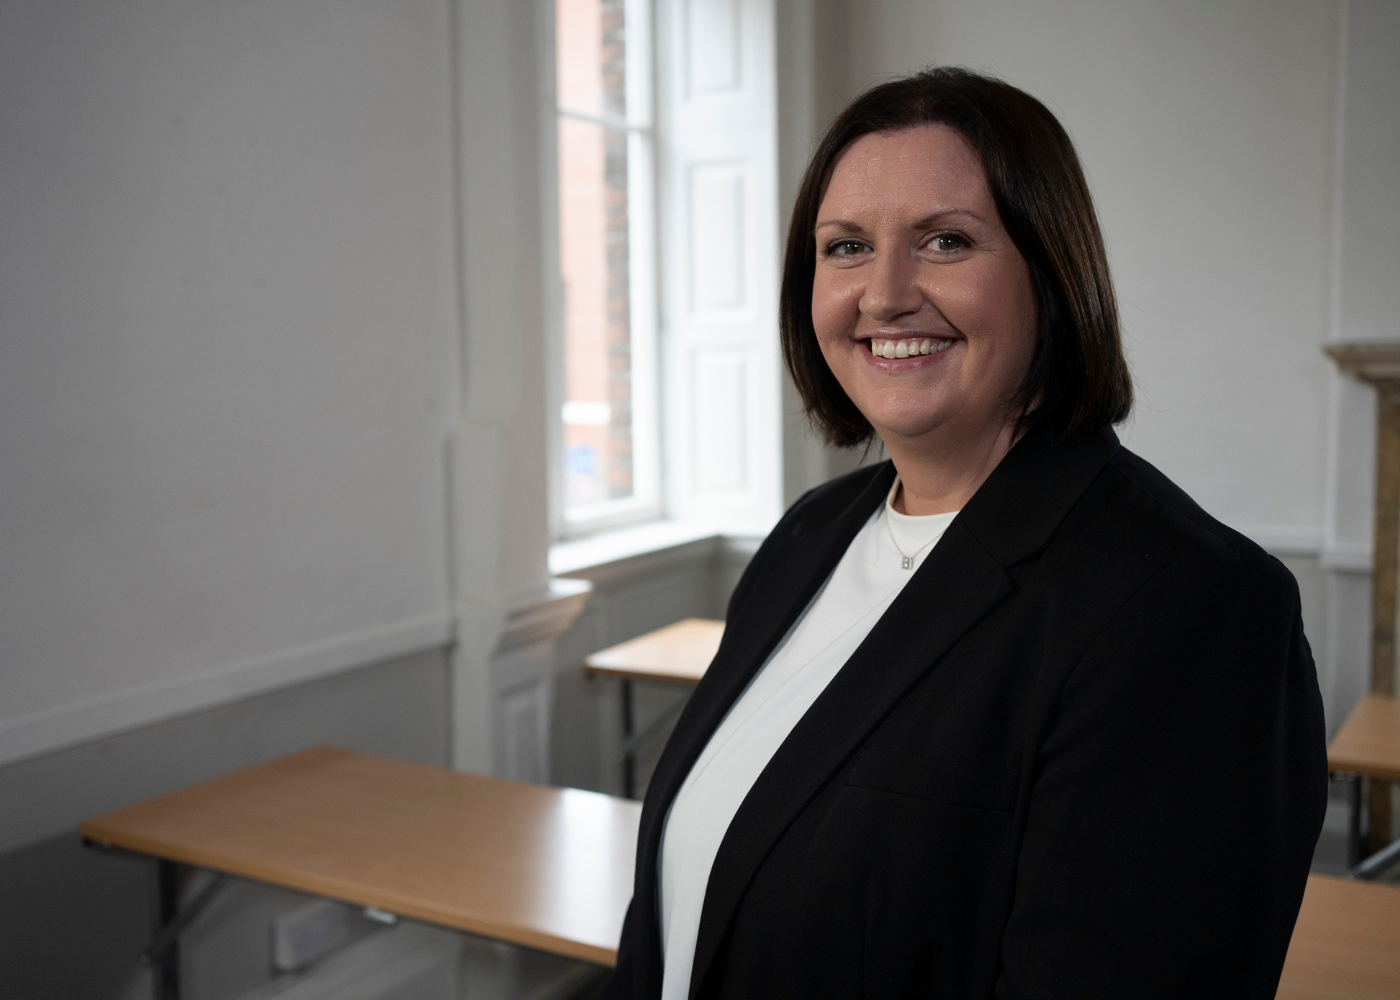 Fiona Kavanagh – Career Change From Accounts Manager to Achieving Her Dream as a Preschool Owner